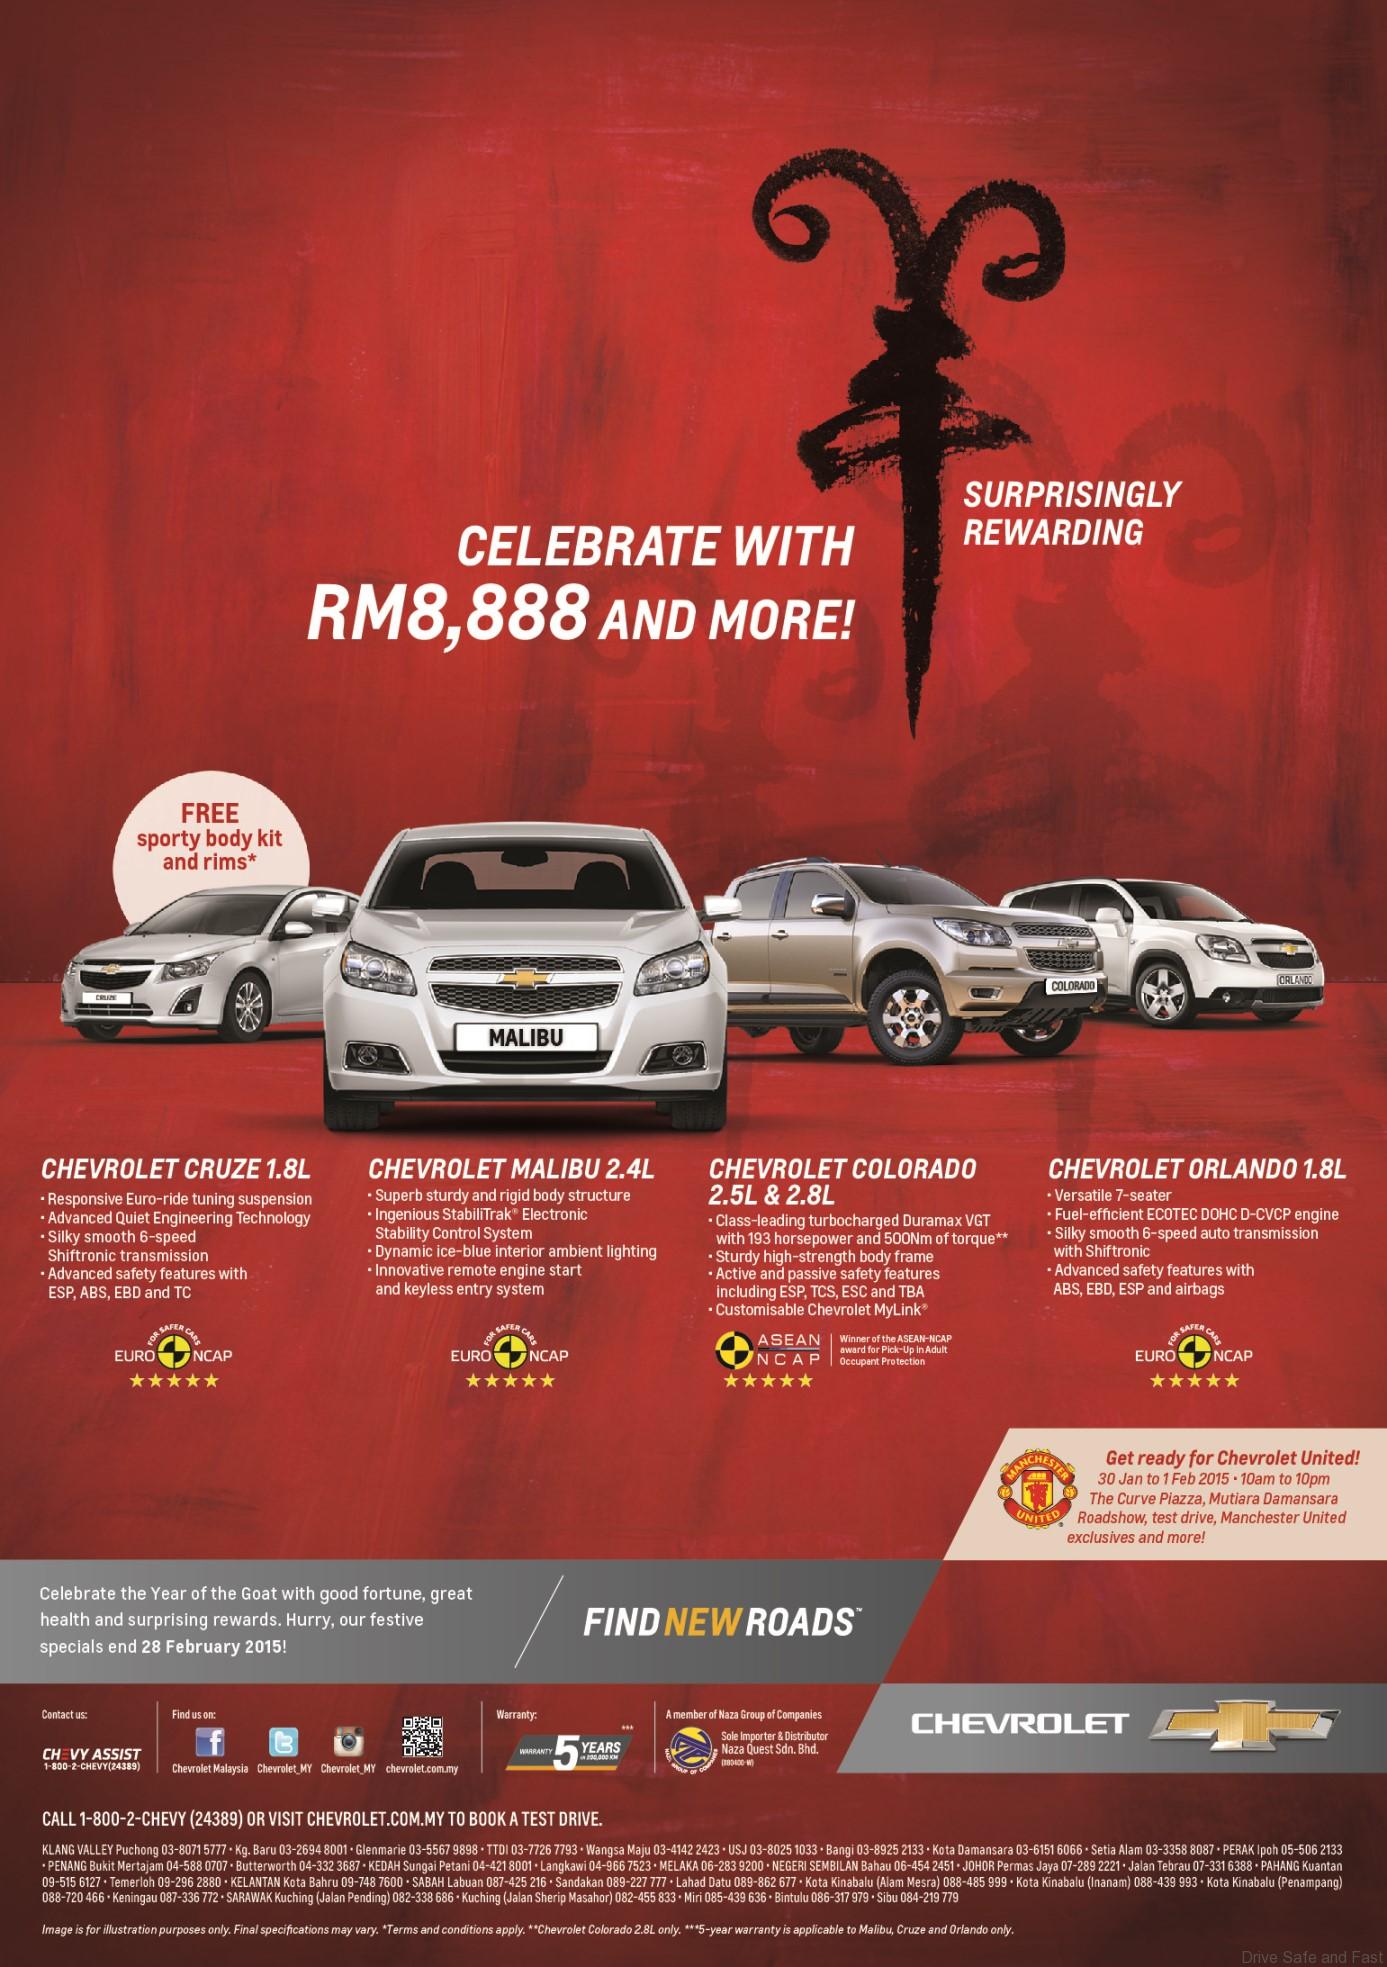 chevrolet-welcoming-2015-with-rm8-888-rebate-chinese-new-year-campaign